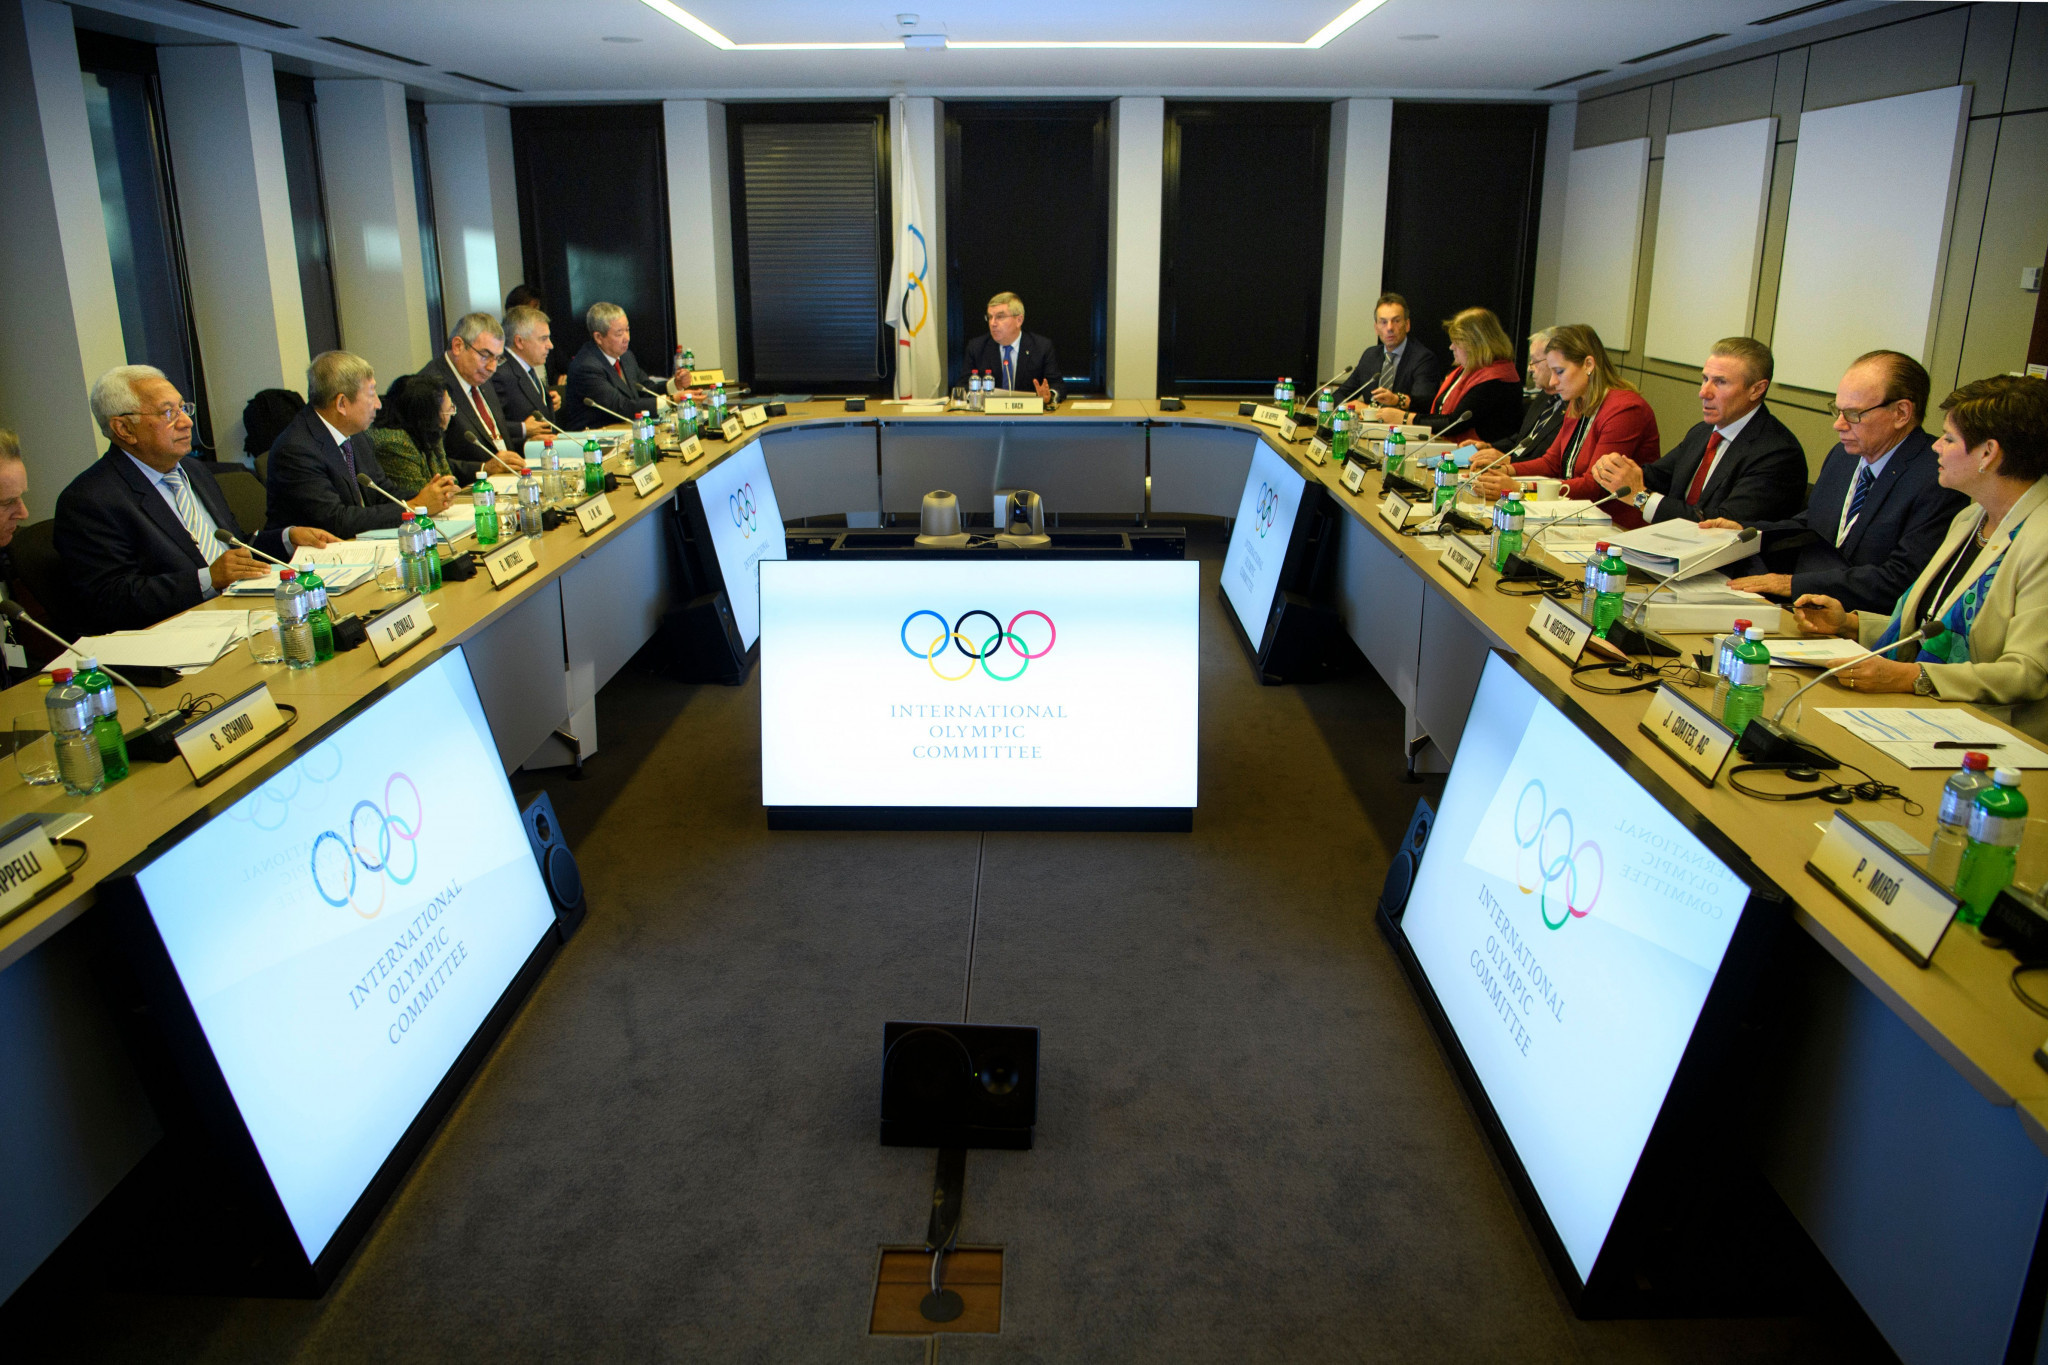 AIBA and Pyeongchang 2018 "success" to be discussed at IOC Executive Board meeting